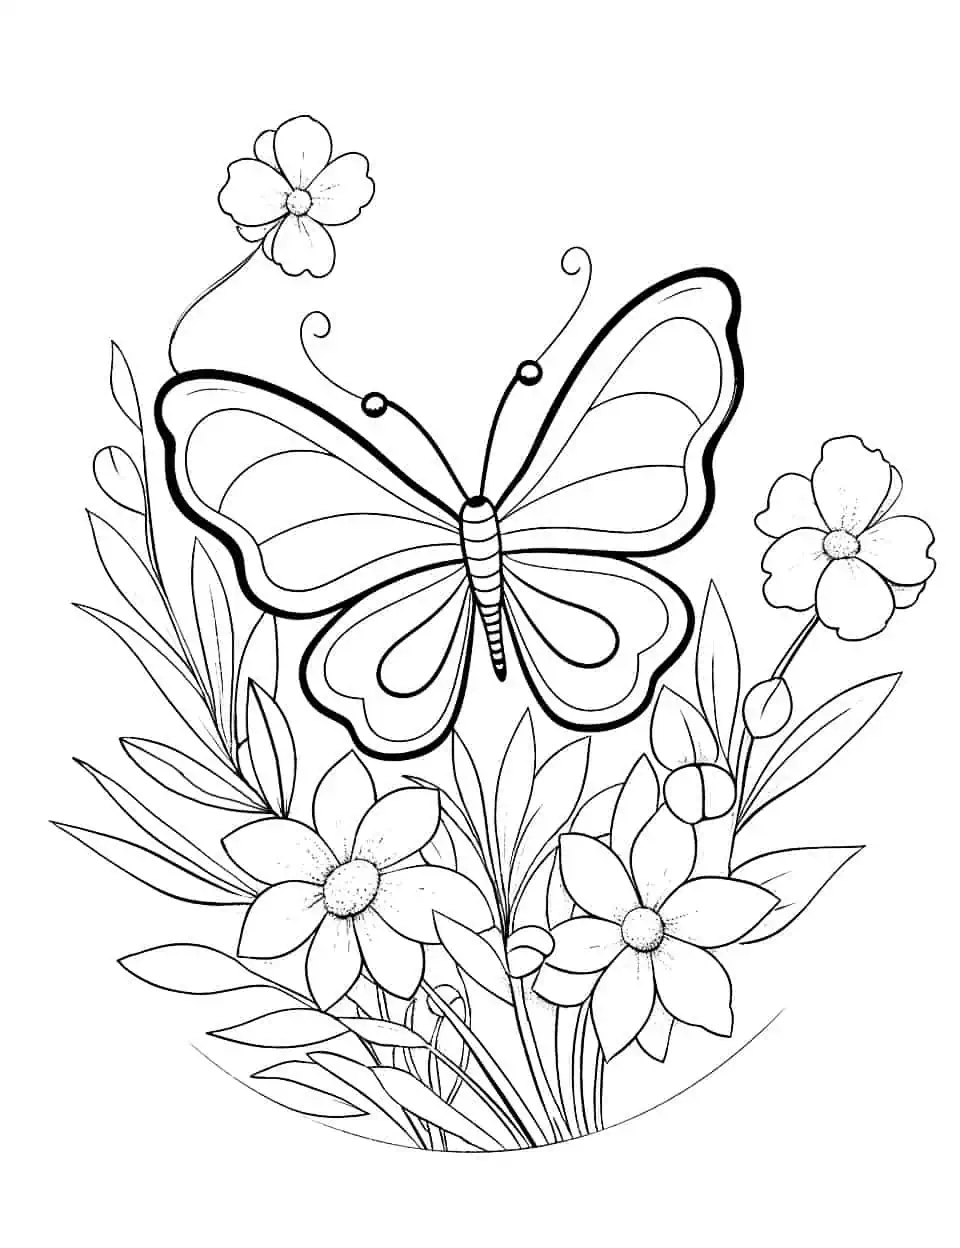 Butterfly Mandala Spring Coloring Page - A complex, detailed mandala featuring a beautiful butterfly amidst spring flowers.